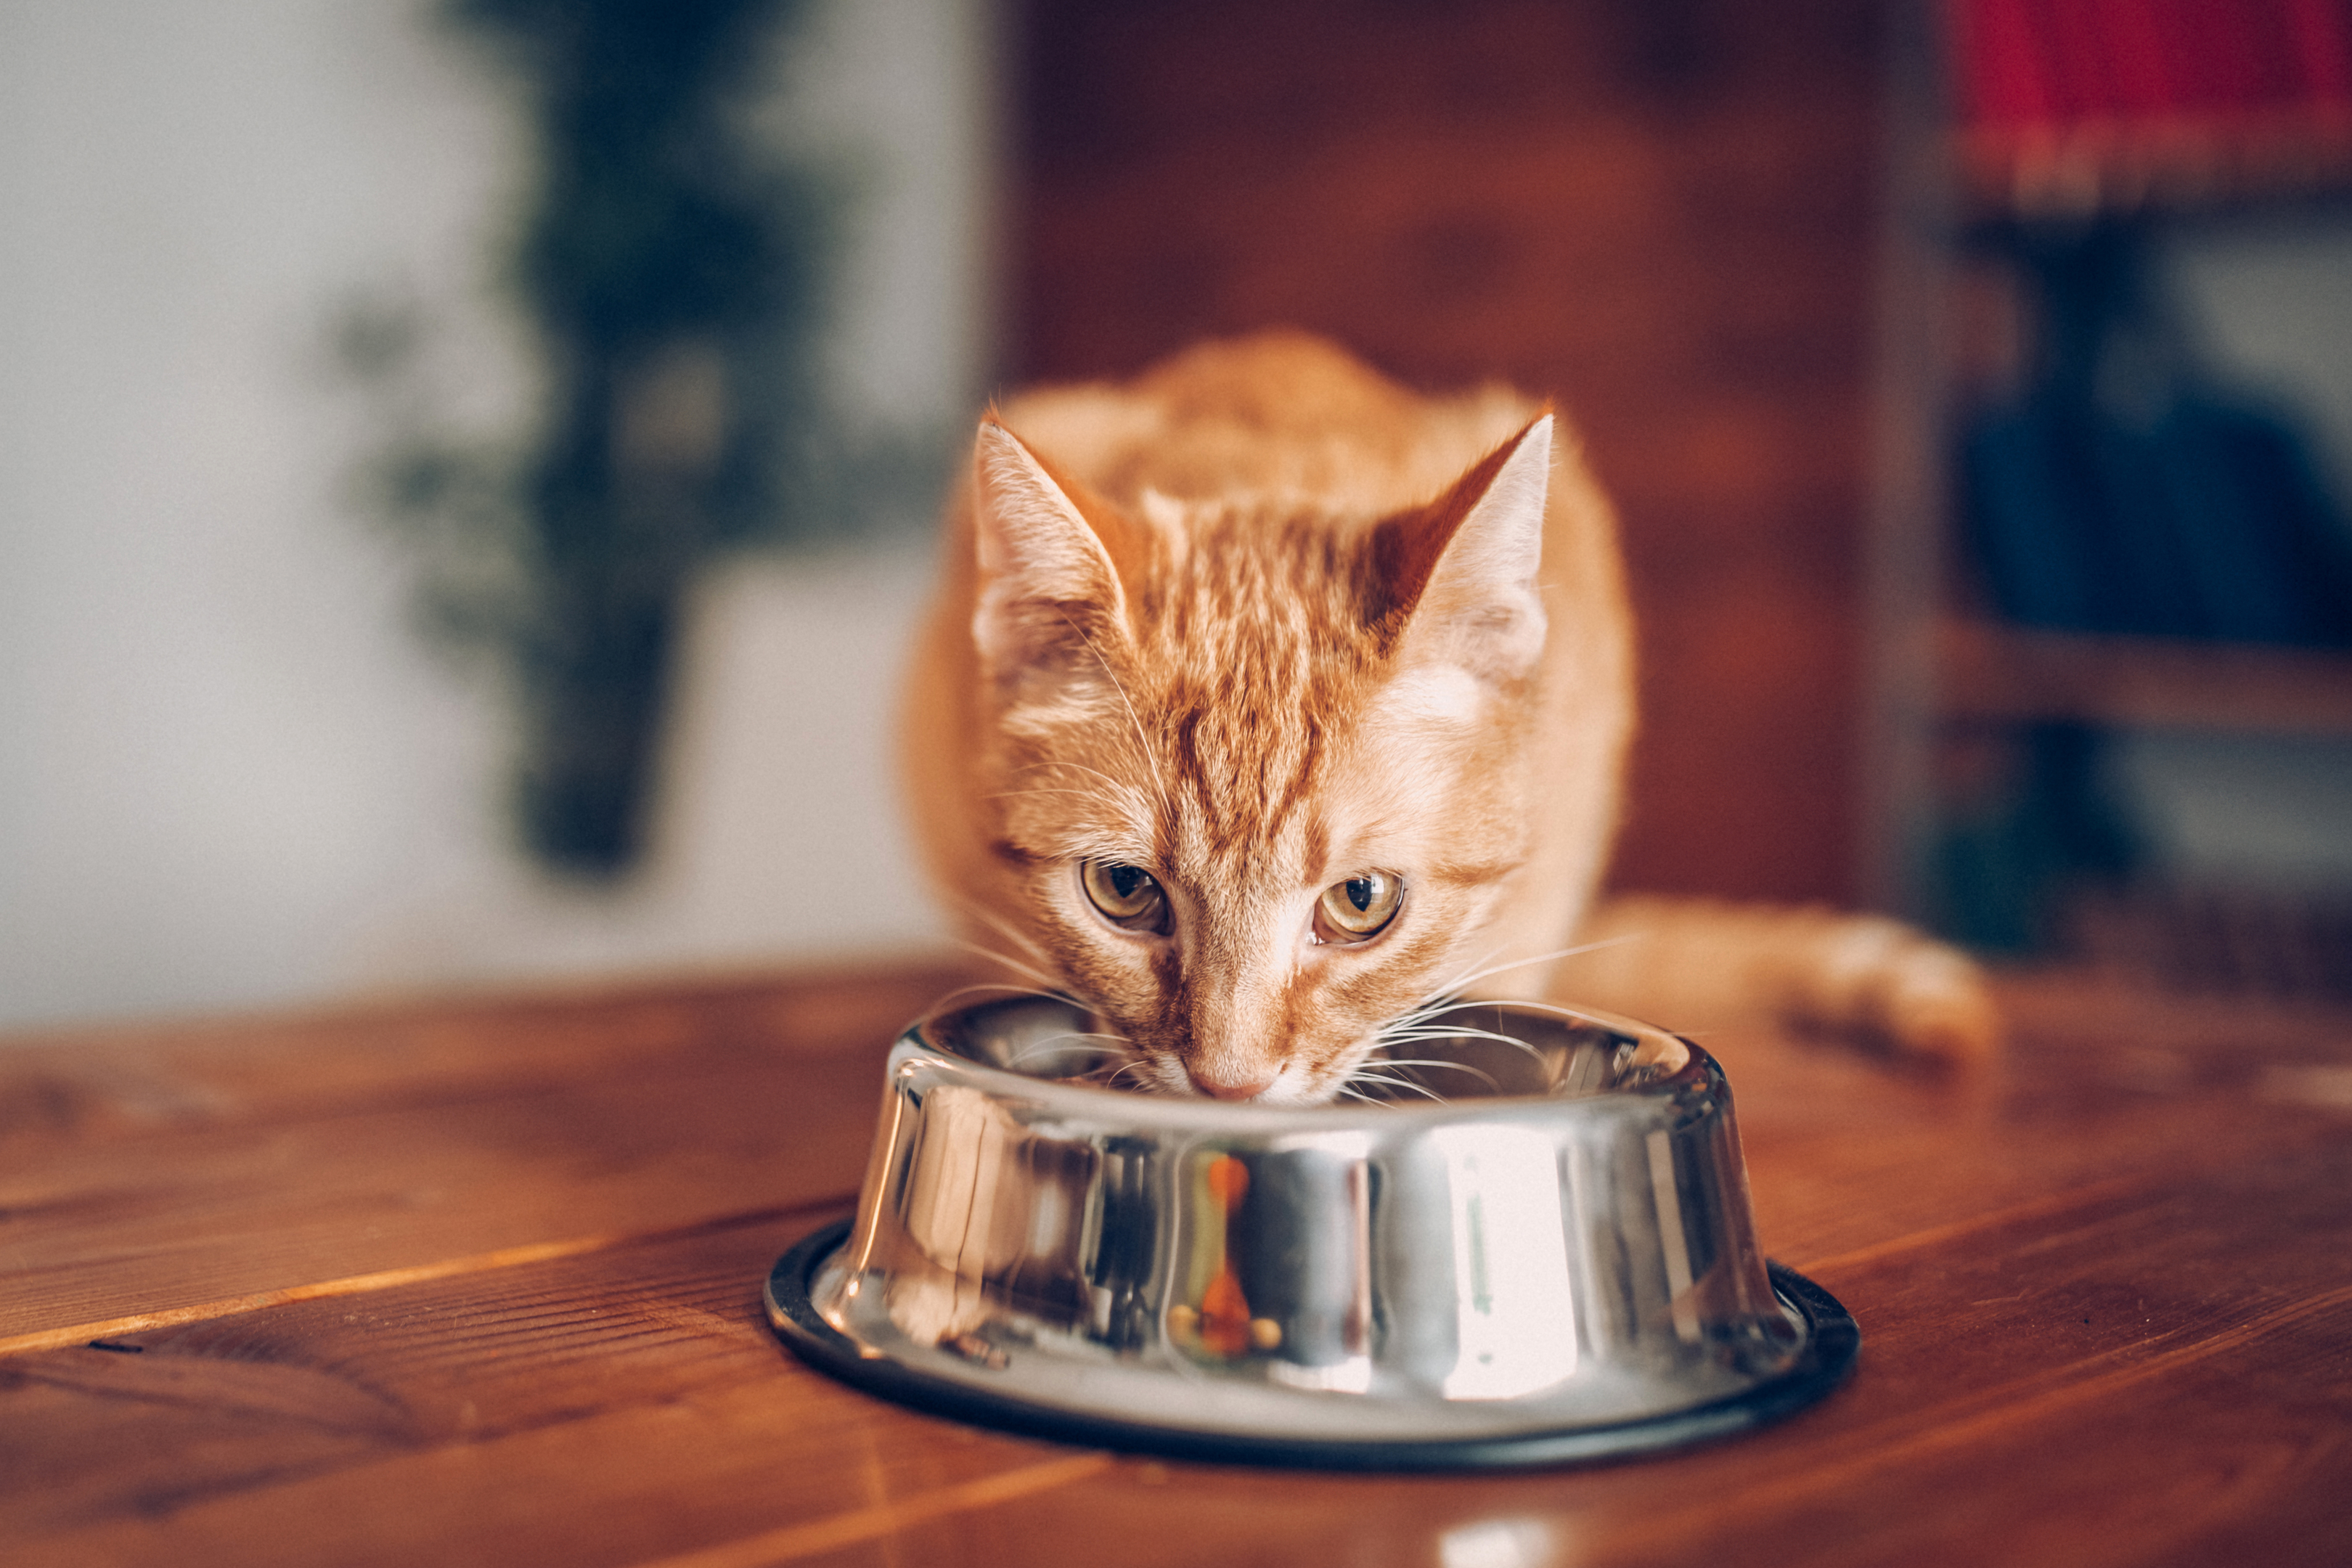 What Are You Feeding Your Cat? - My Weekly